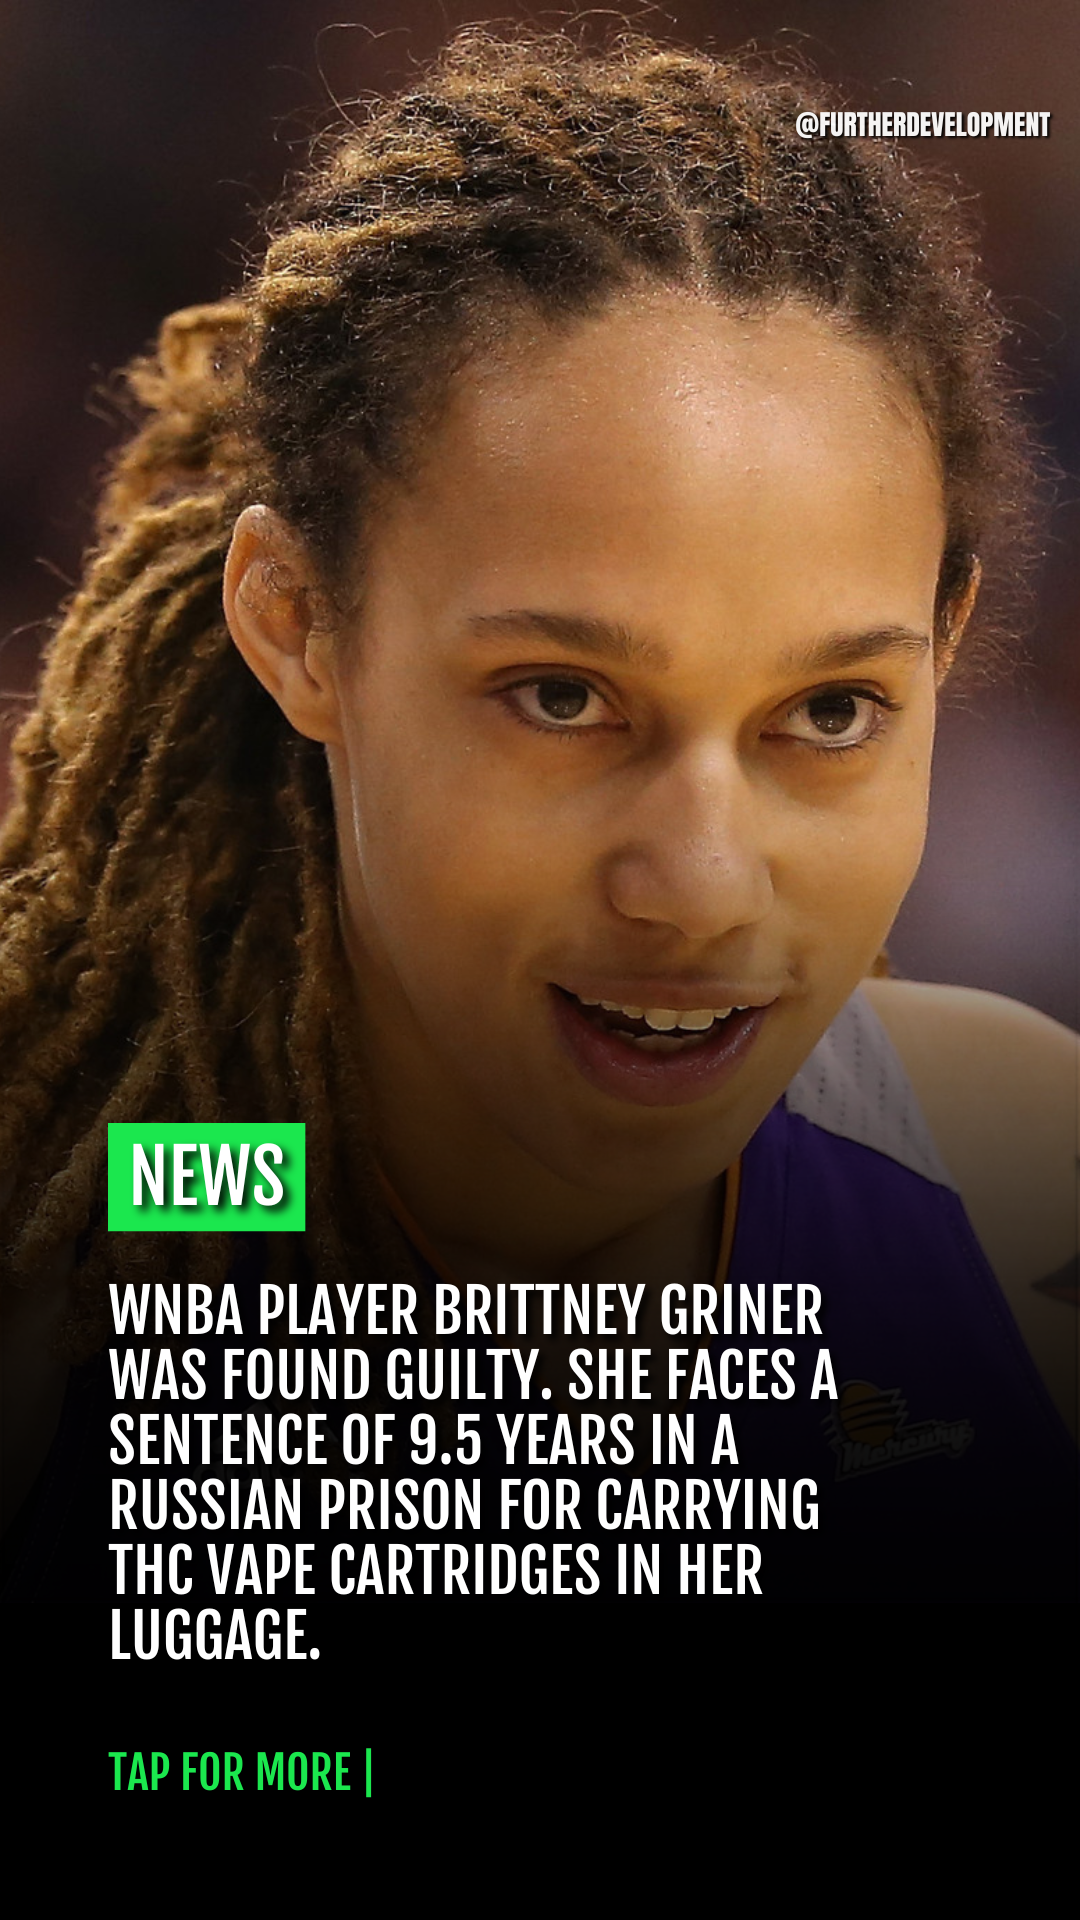 WNBA player Brittney Griner was found guilty. She faces a sentence of 9.5 years in a Russian prison for carrying THC vape cartridges in her luggage.